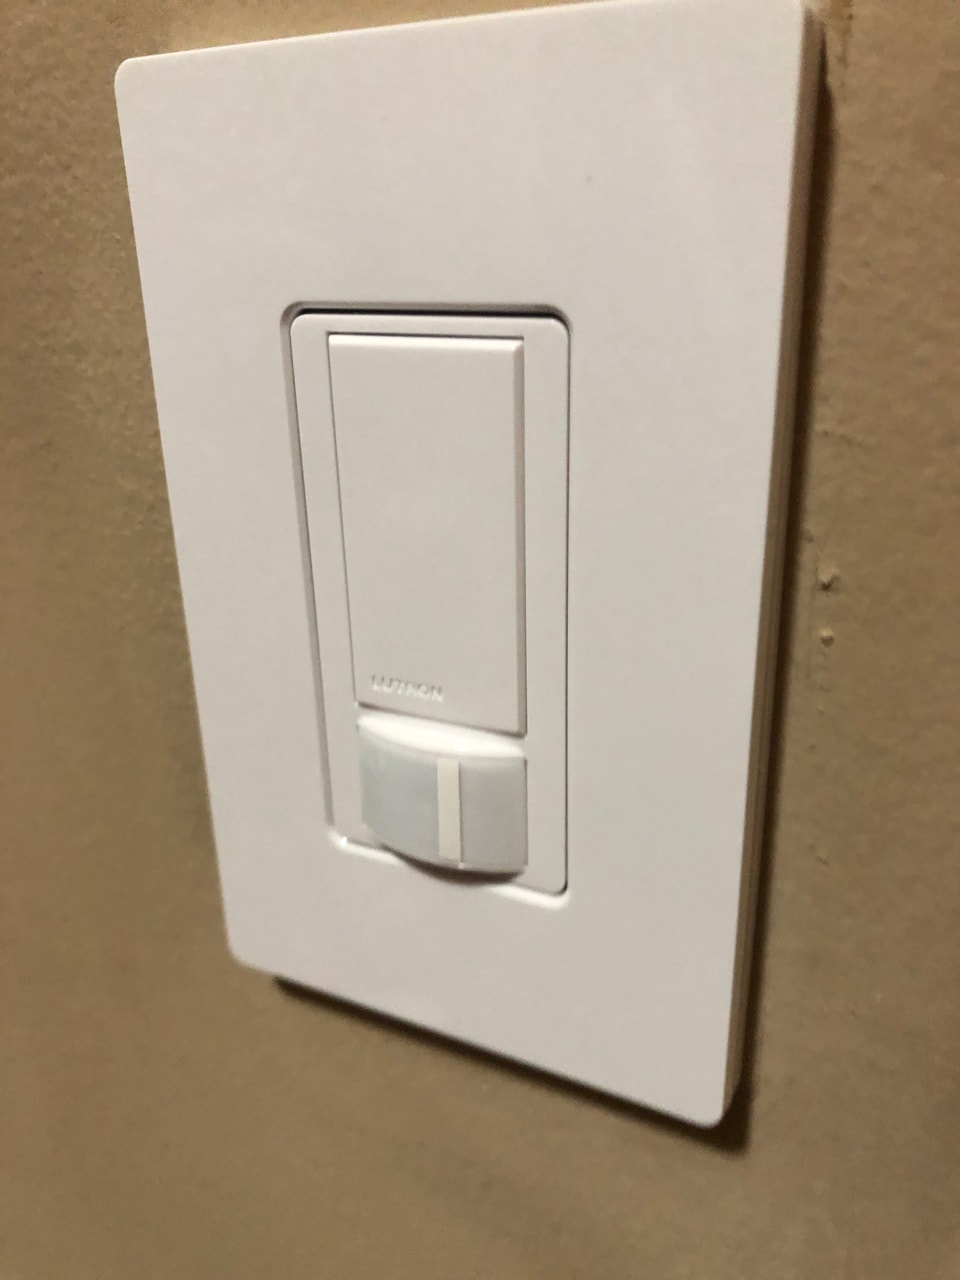 motion sensor covered with white tape